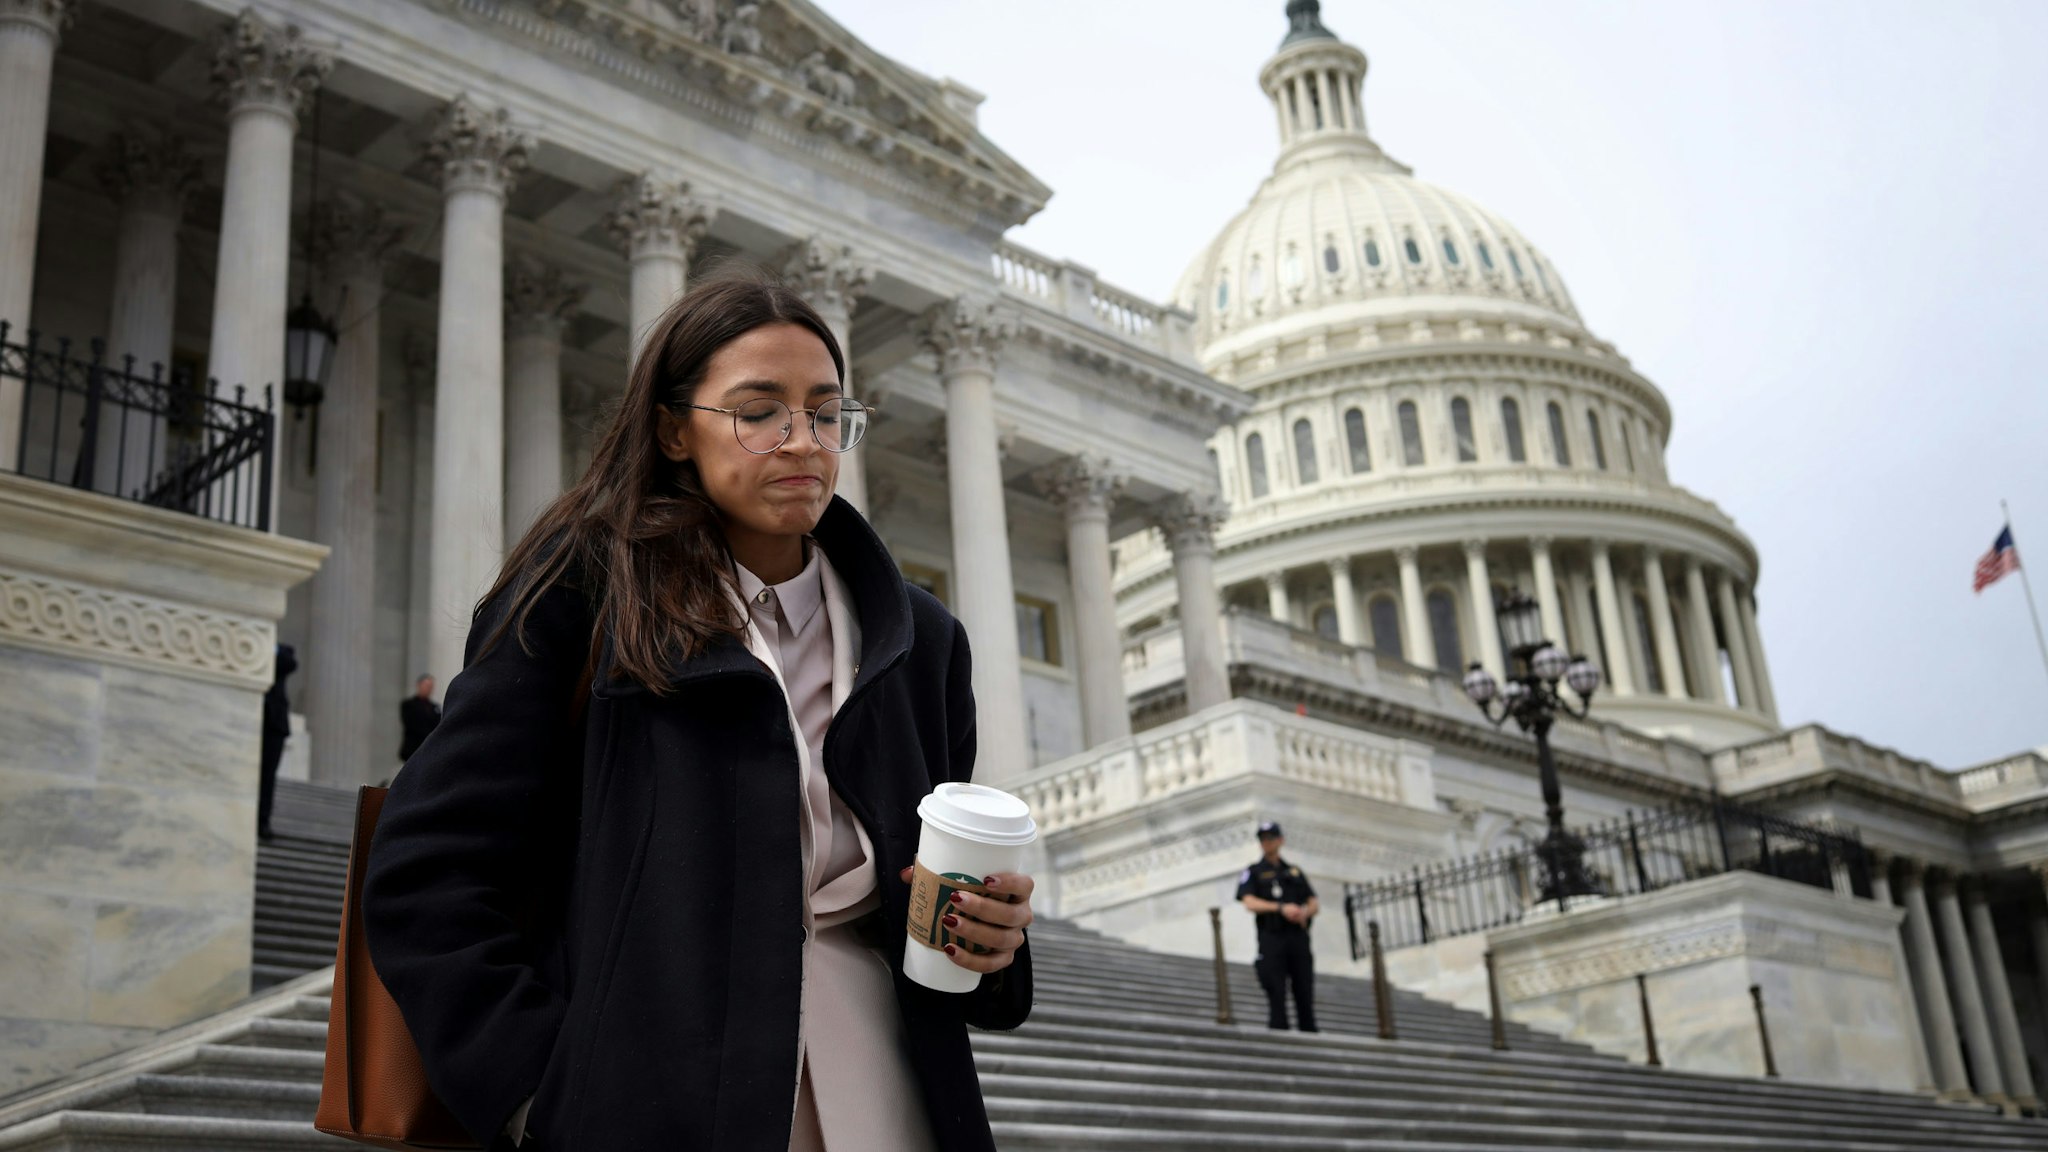 WASHINGTON, DC - MARCH 27: Rep. Alexandria Ocasio-Cortez (D-NY) leaves the U.S. Capitol after passage of the stimulus bill known as the CARES Act on March 27, 2020 in Washington, DC. The stimulus bill is intended to combat the economic effects caused by the coronavirus pandemic. (Photo by Win McNamee/Getty Images)